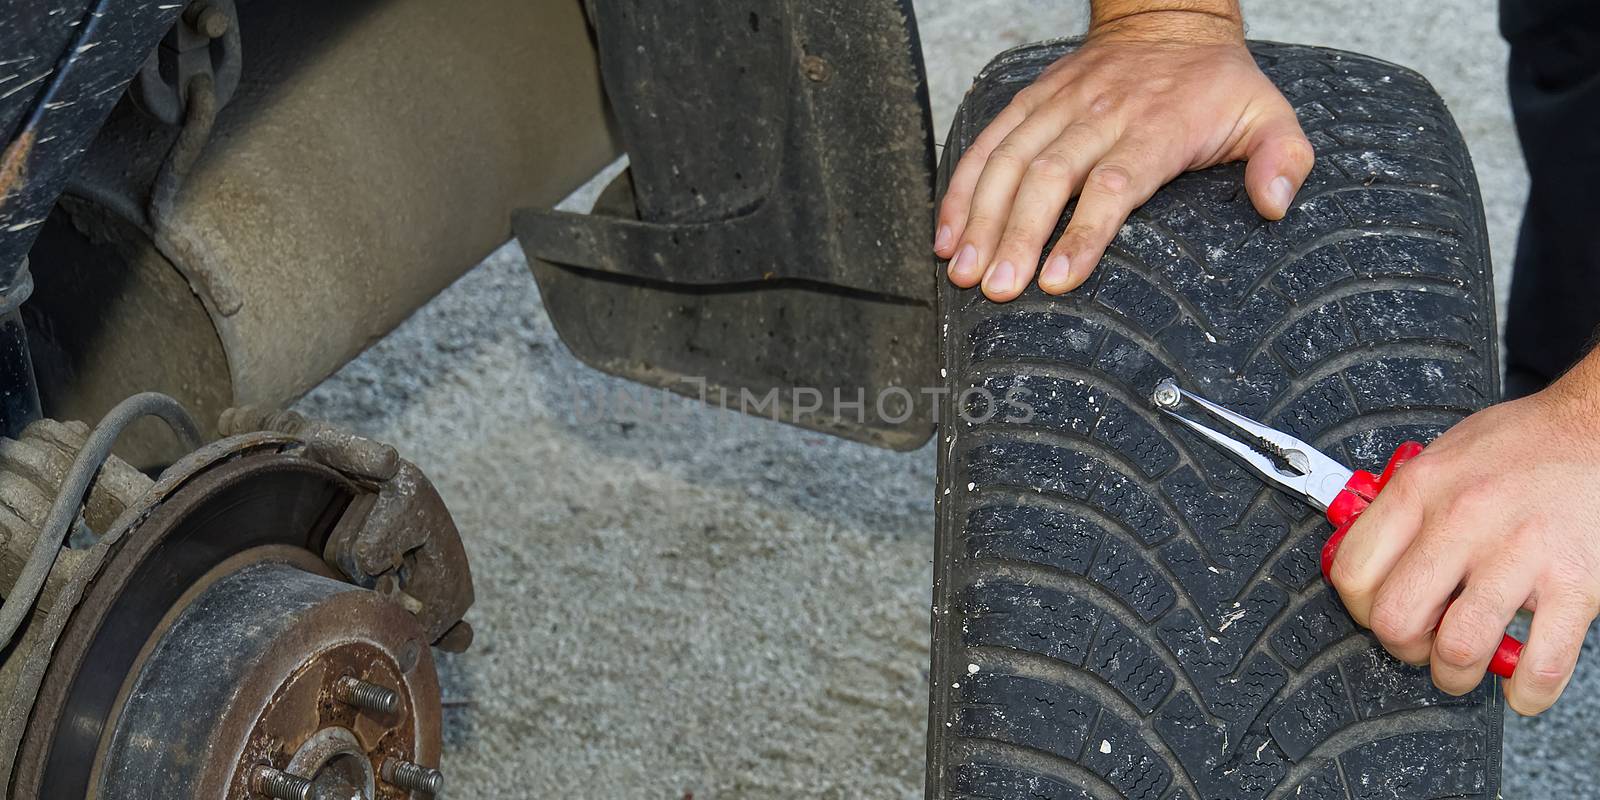 screw in car flat tire. mechanic repair a tire puncture from a nail or screw. car repair and maintenance concept by PhotoTime